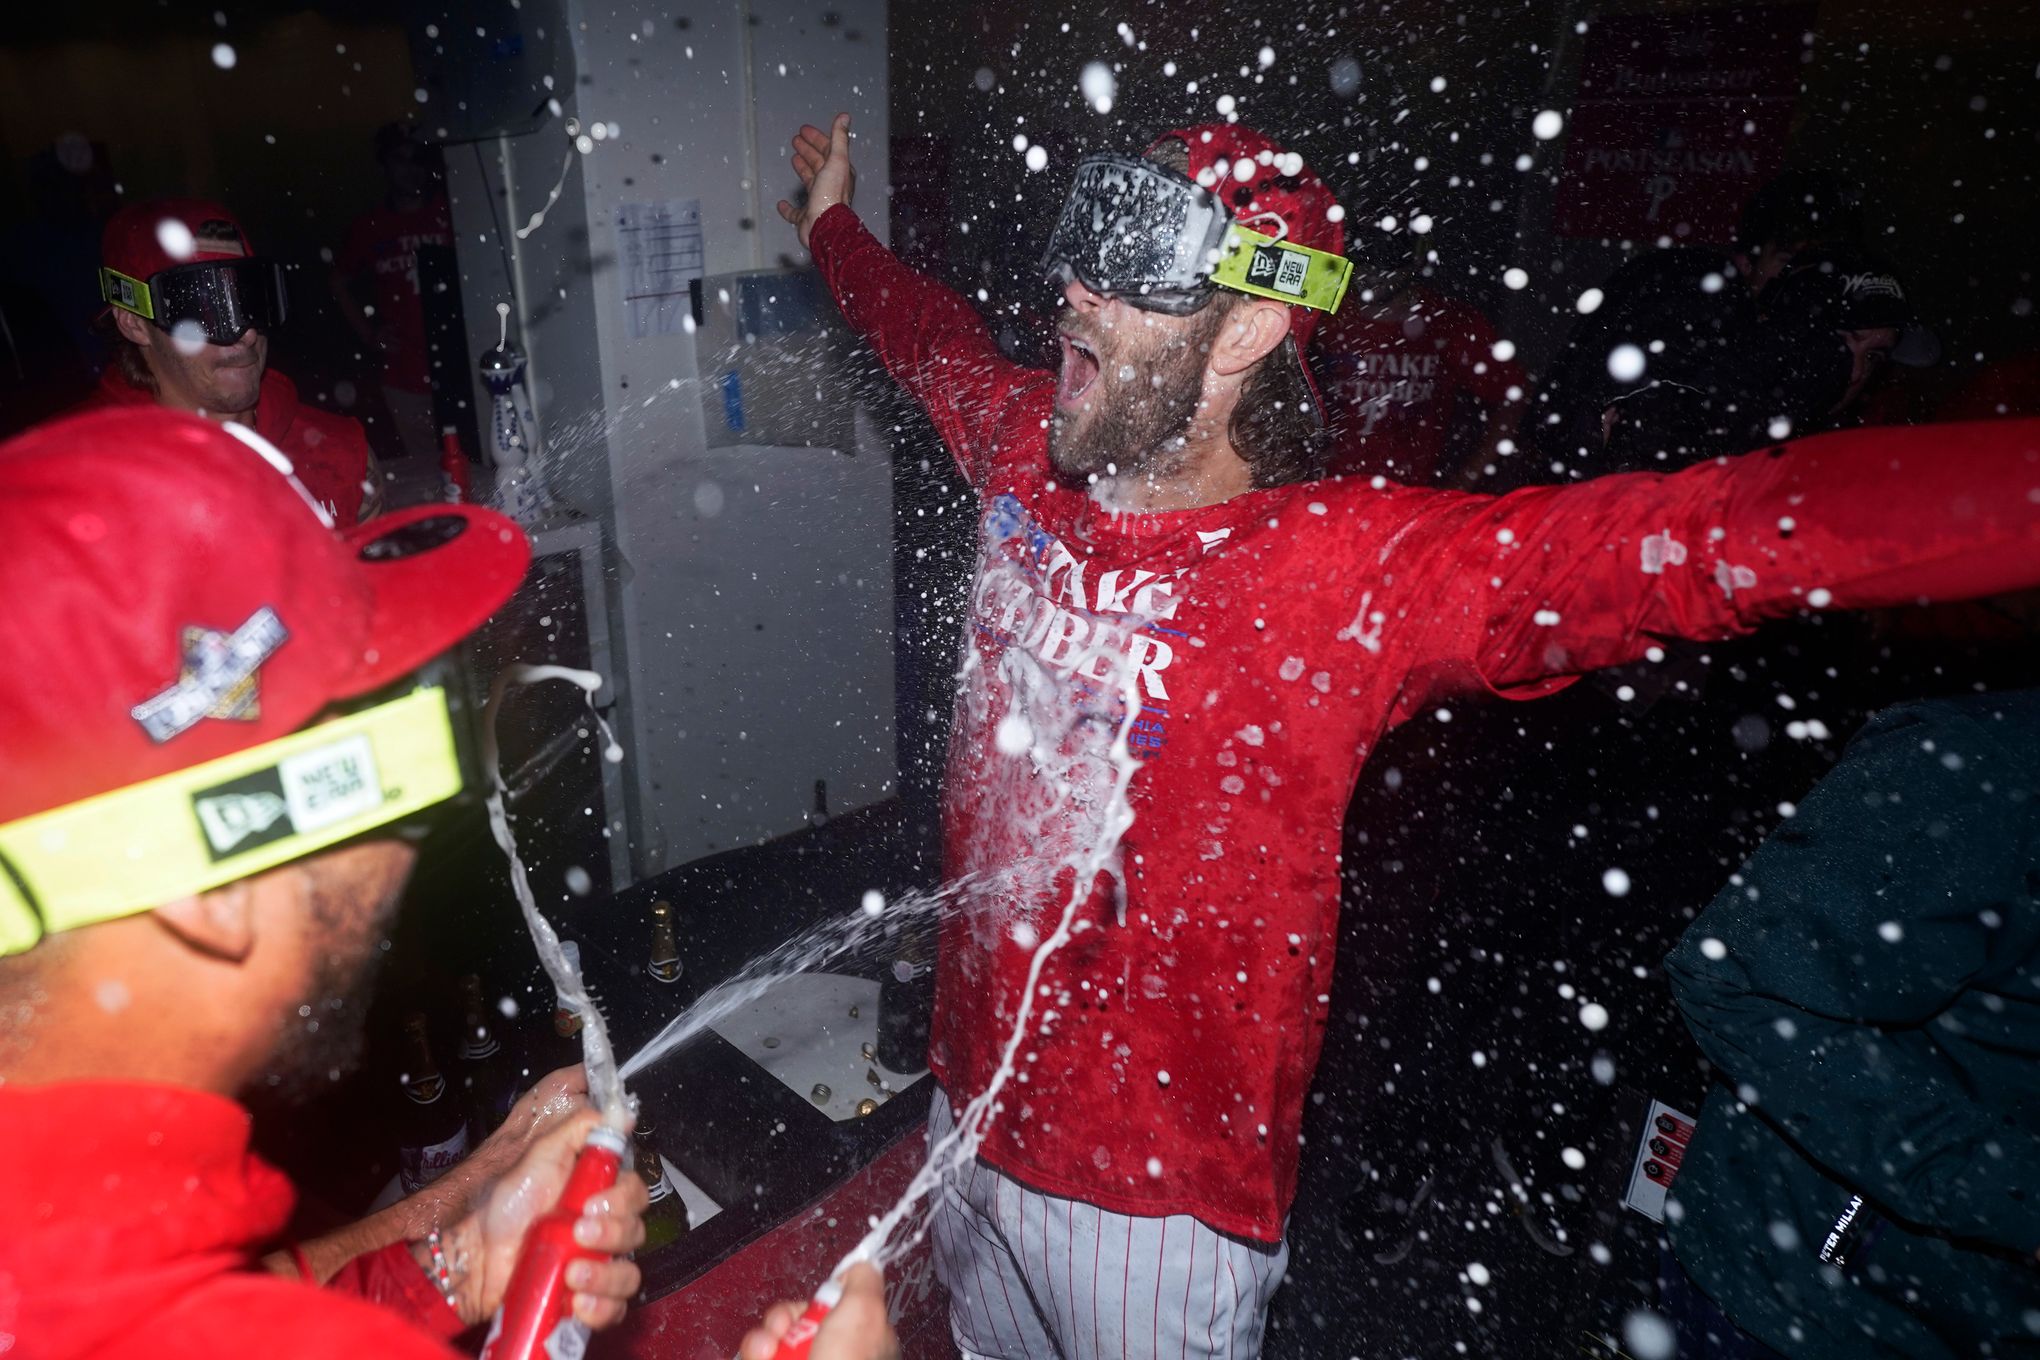 The Phillies are again embracing 'Dancing On My Own' as their